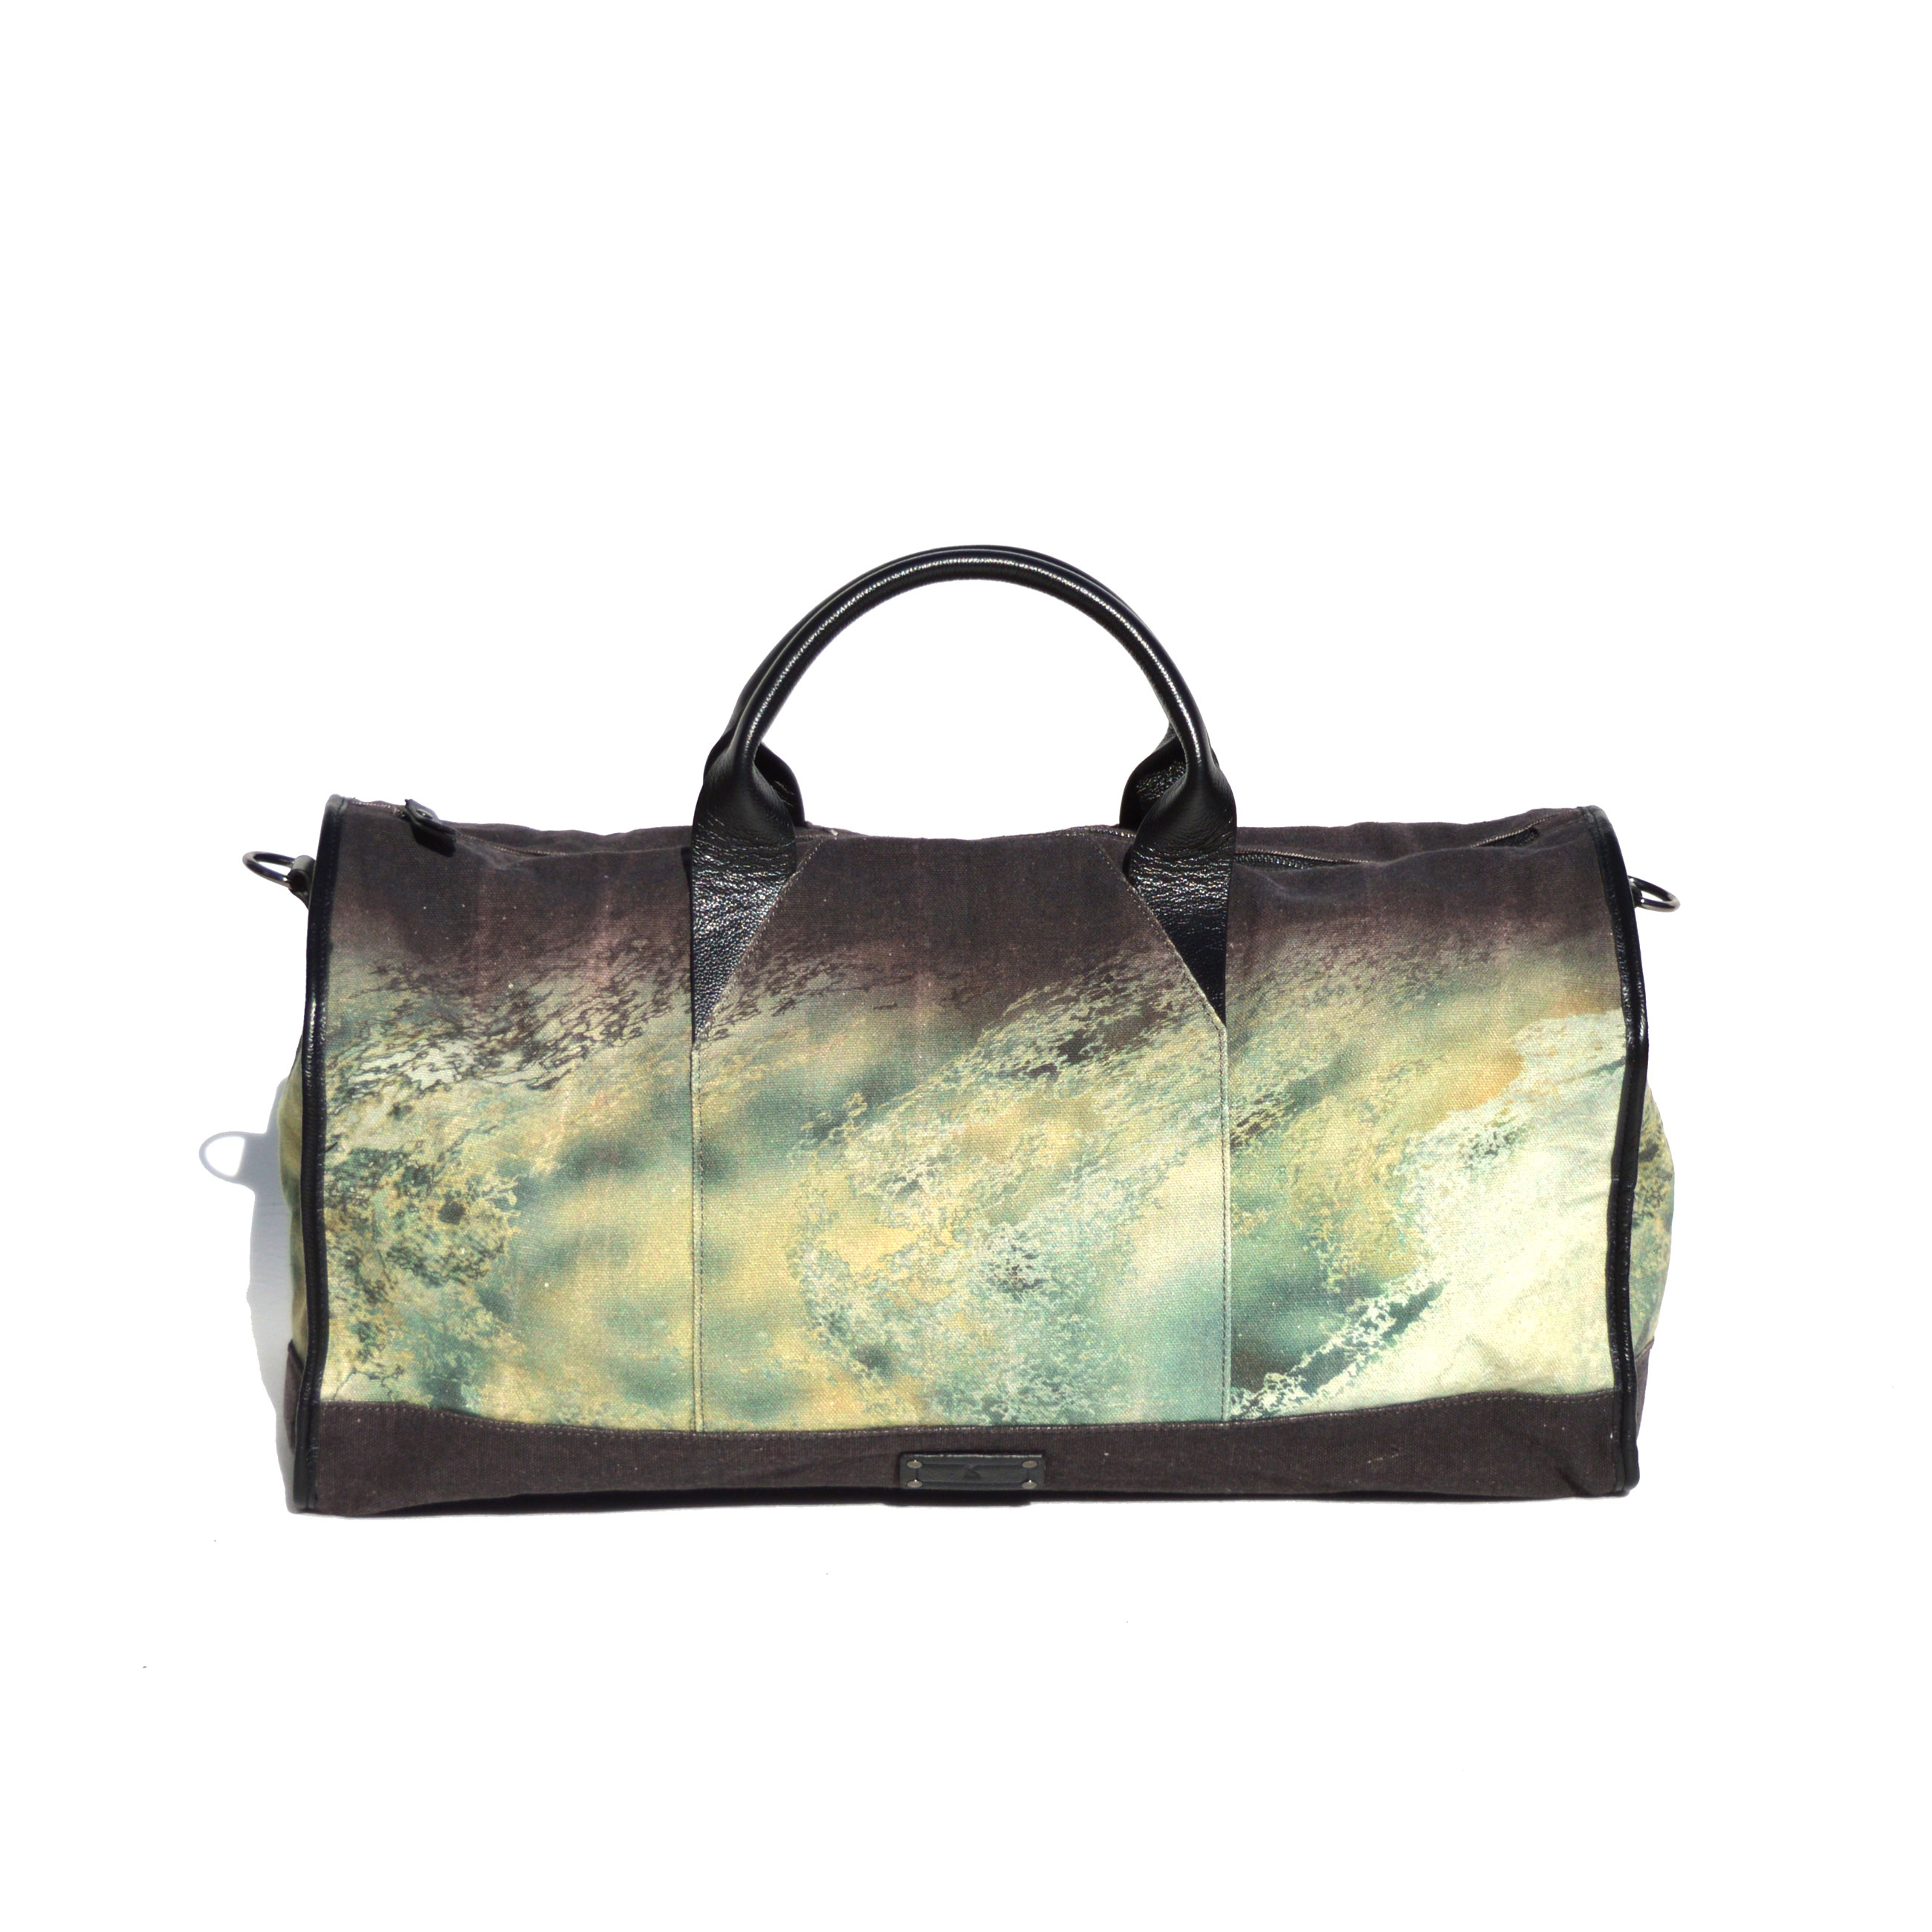 Ron Wan: Fashion collaboration with menswear label Krane Design on an Ombre bag collection